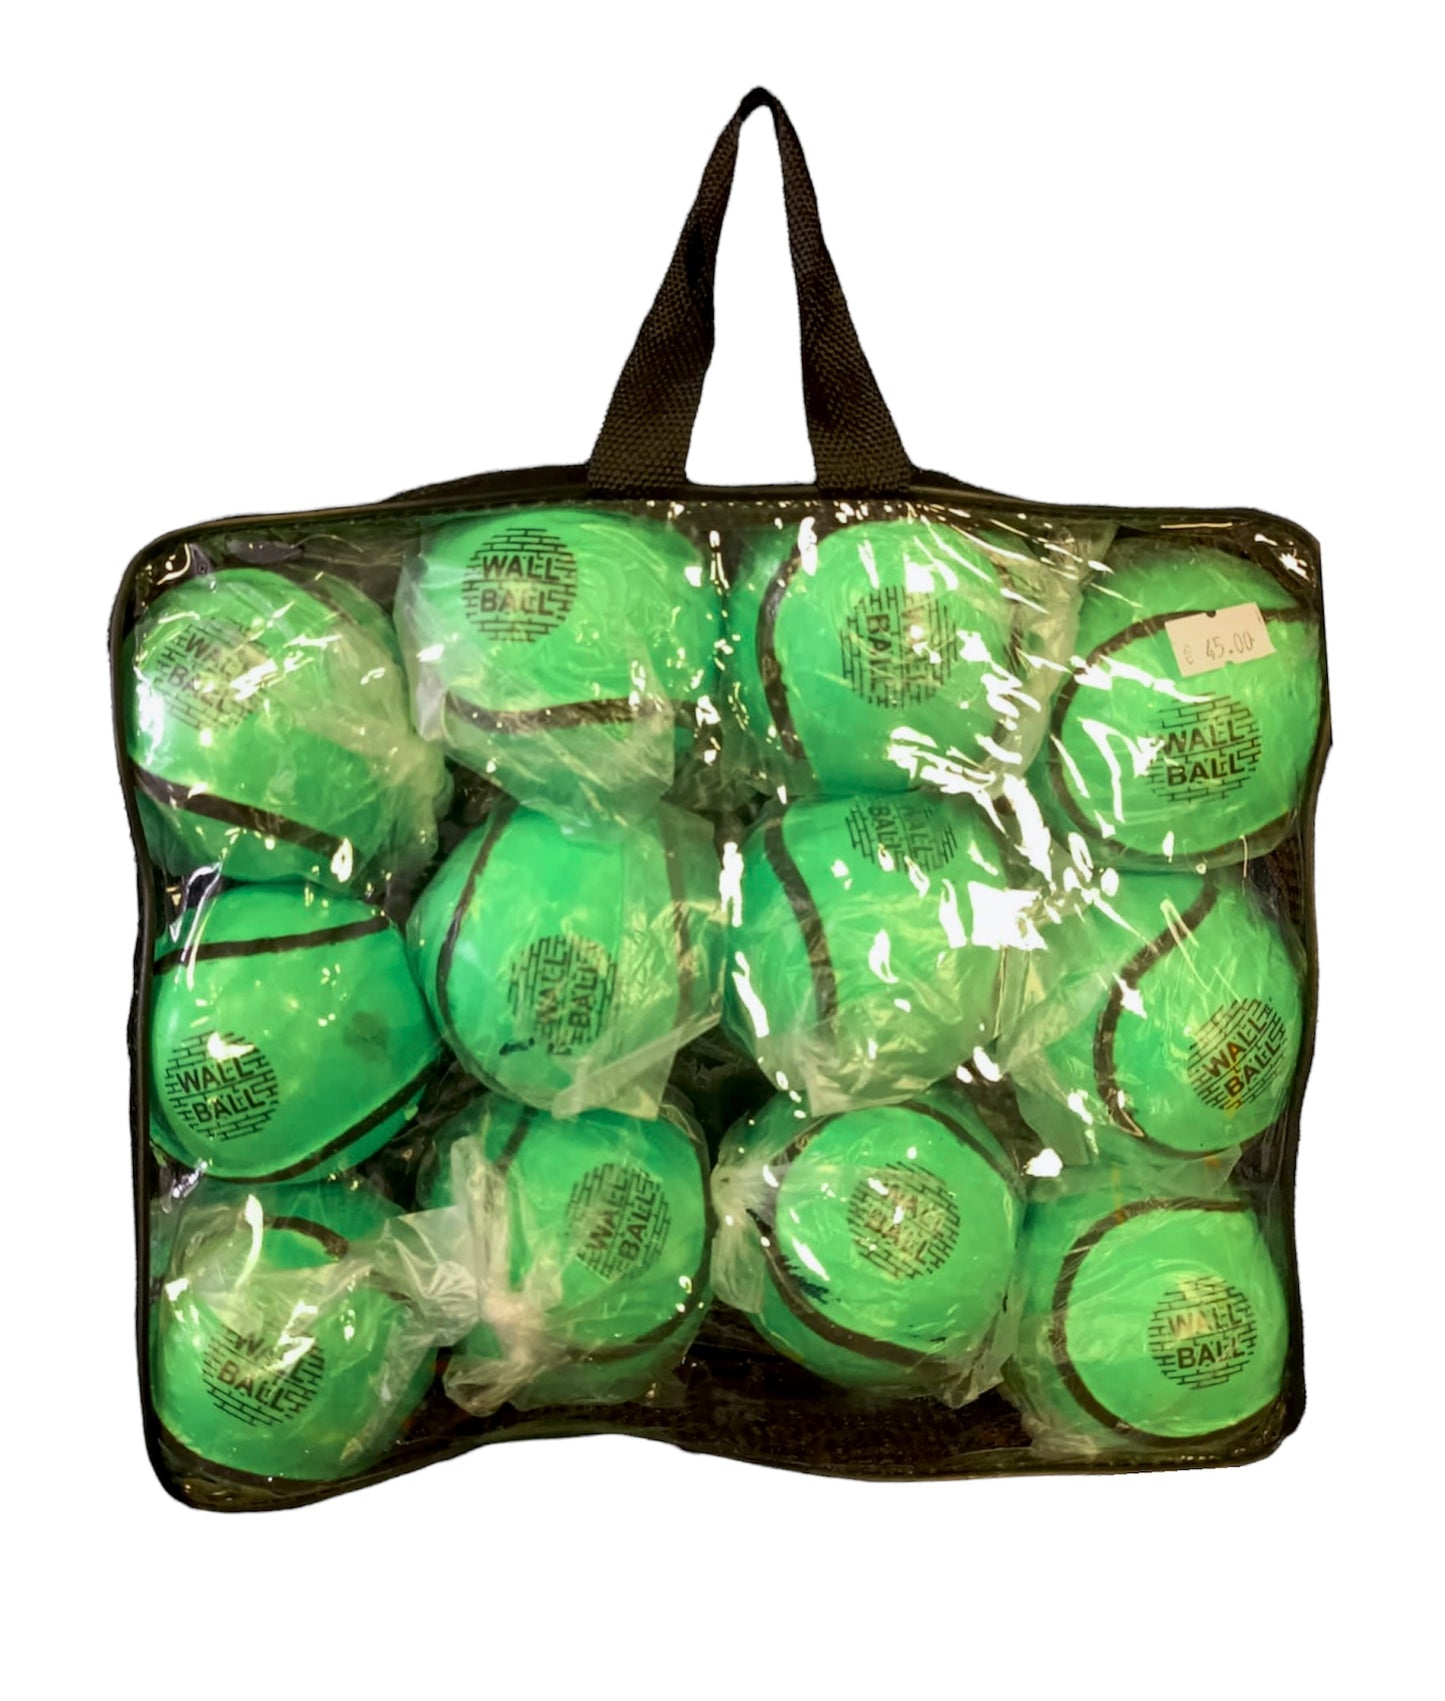 PREMIER SPORTS - WALL BALL GREEN (SIZE 5) Bag of 12